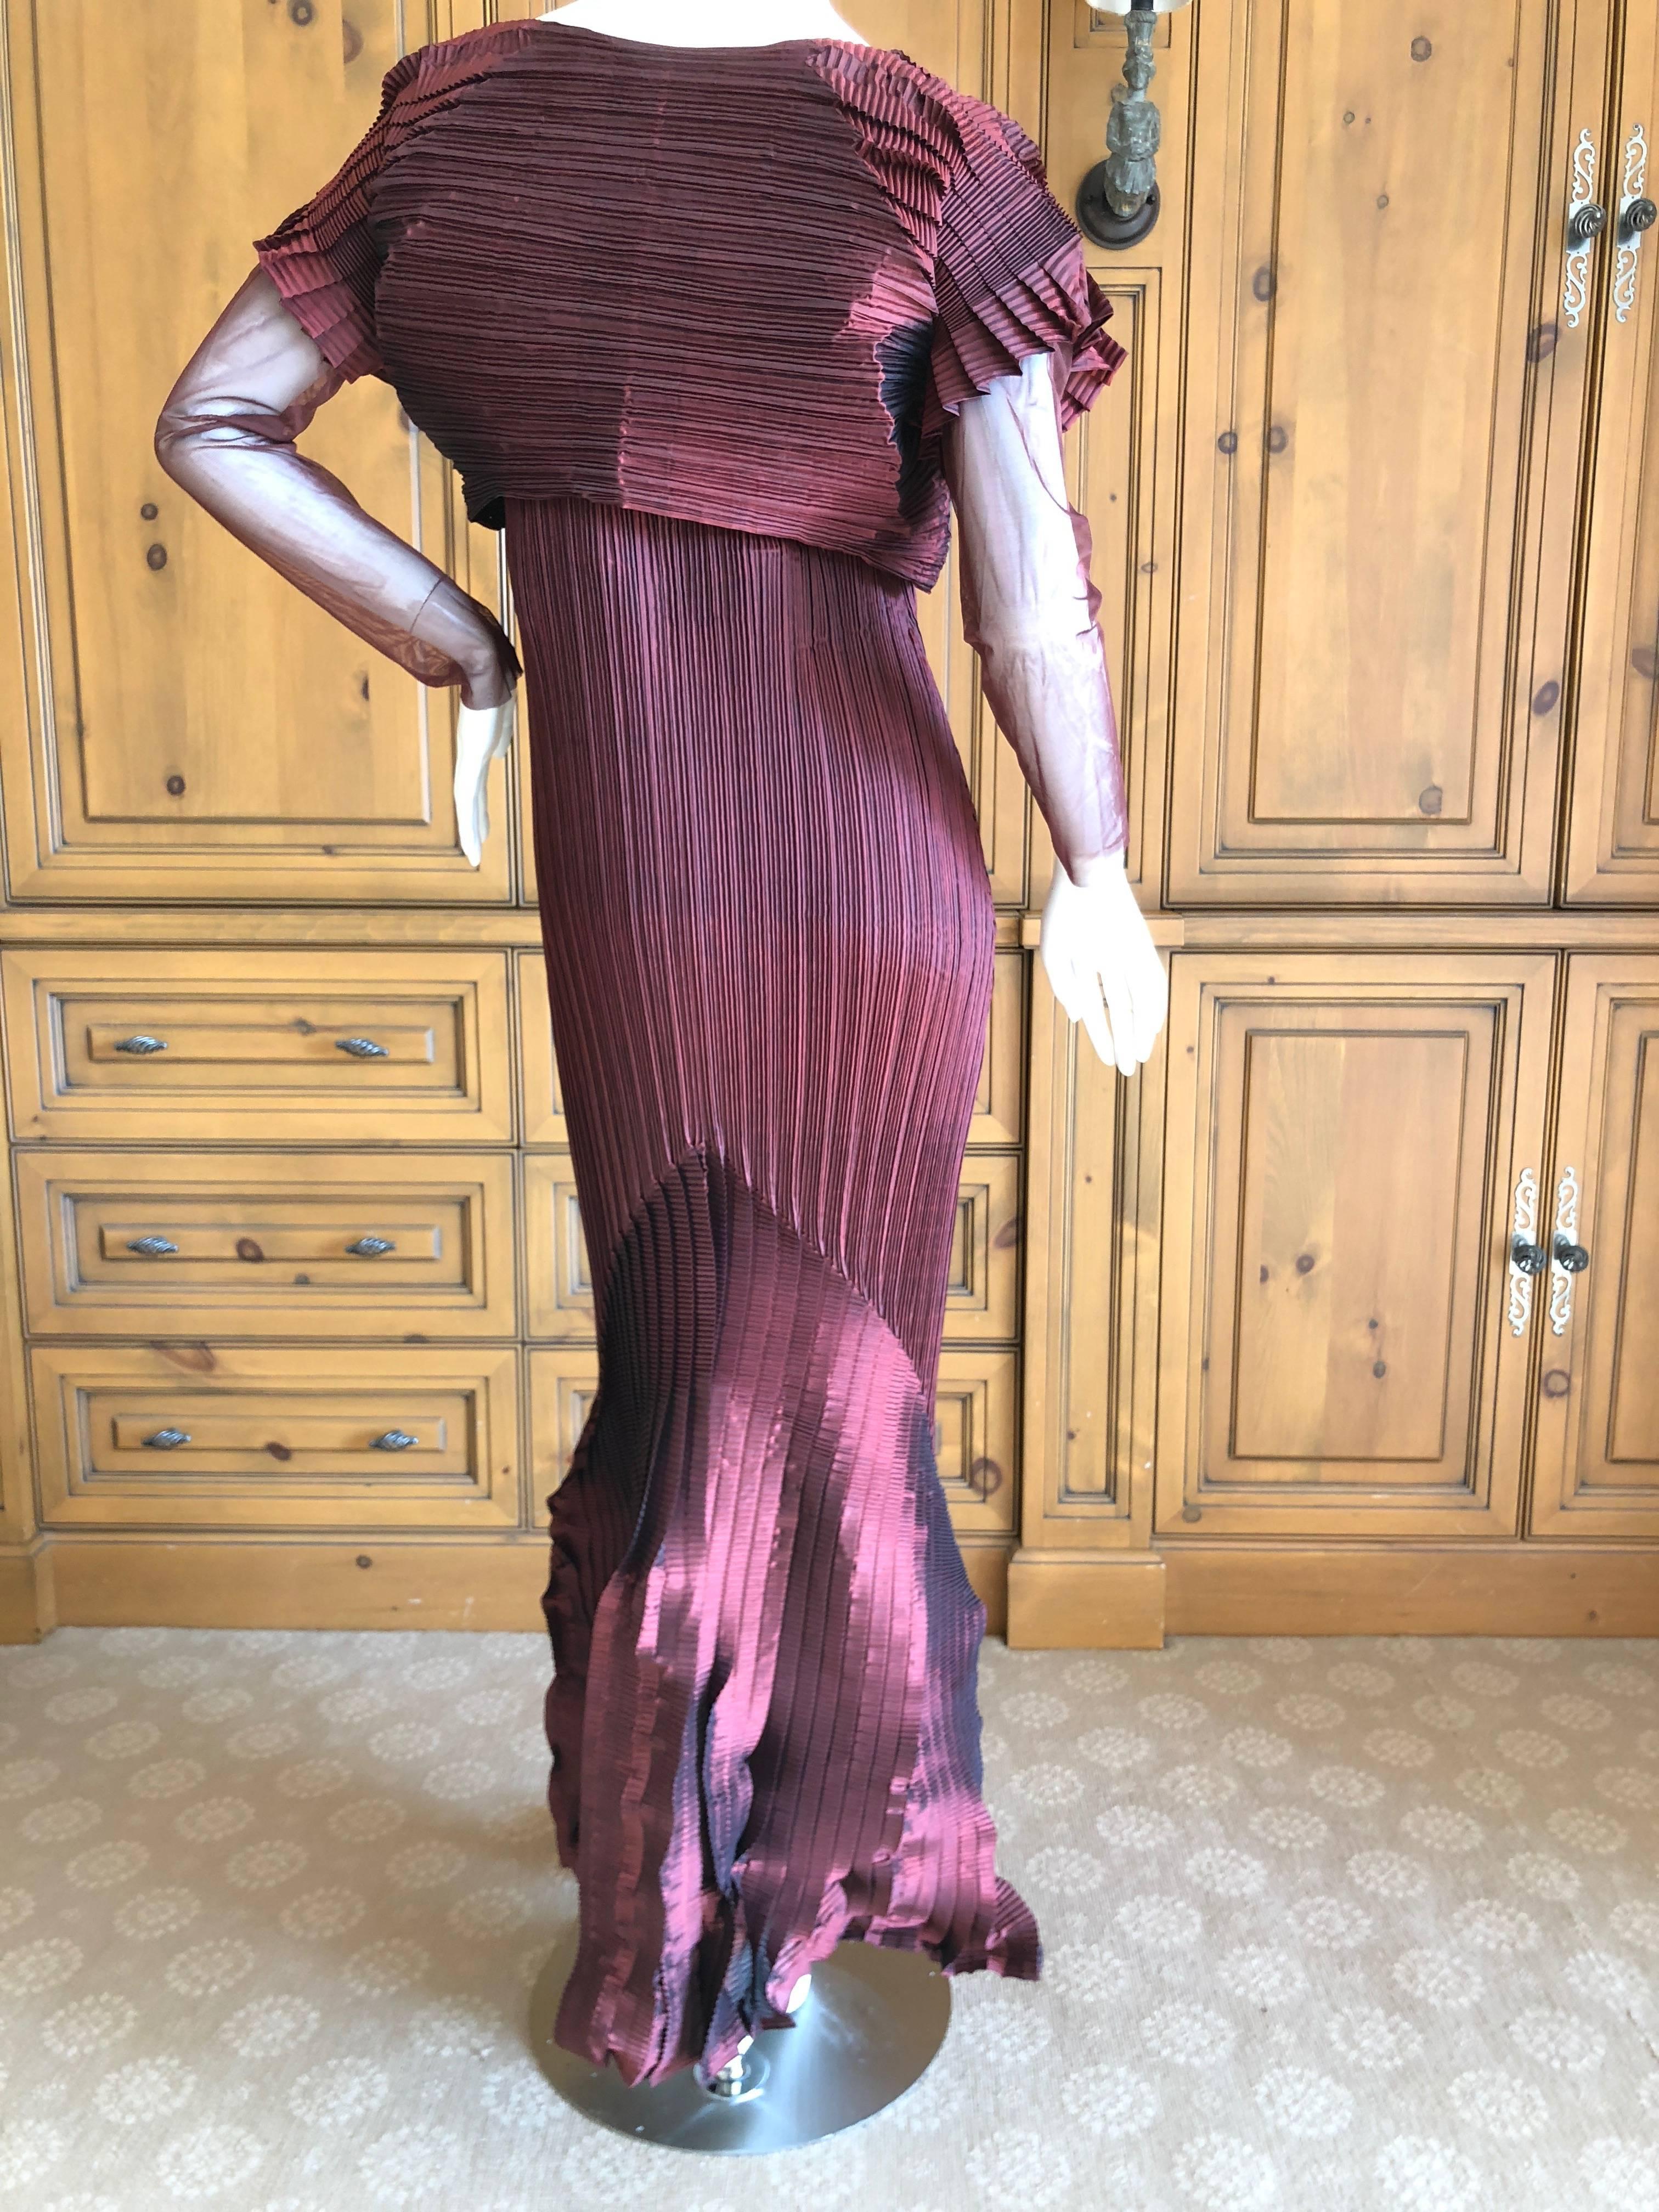 Issey Miyake Fete Vintage Burgundy Evening Dress with Matching Cropped Shrug.
Exquisite dress, the photos don't do it justice.
Japanese Size 2
There is a lot of stretch, the measurements are given un stretched.
Bust 36"
Waist 26"
Hips